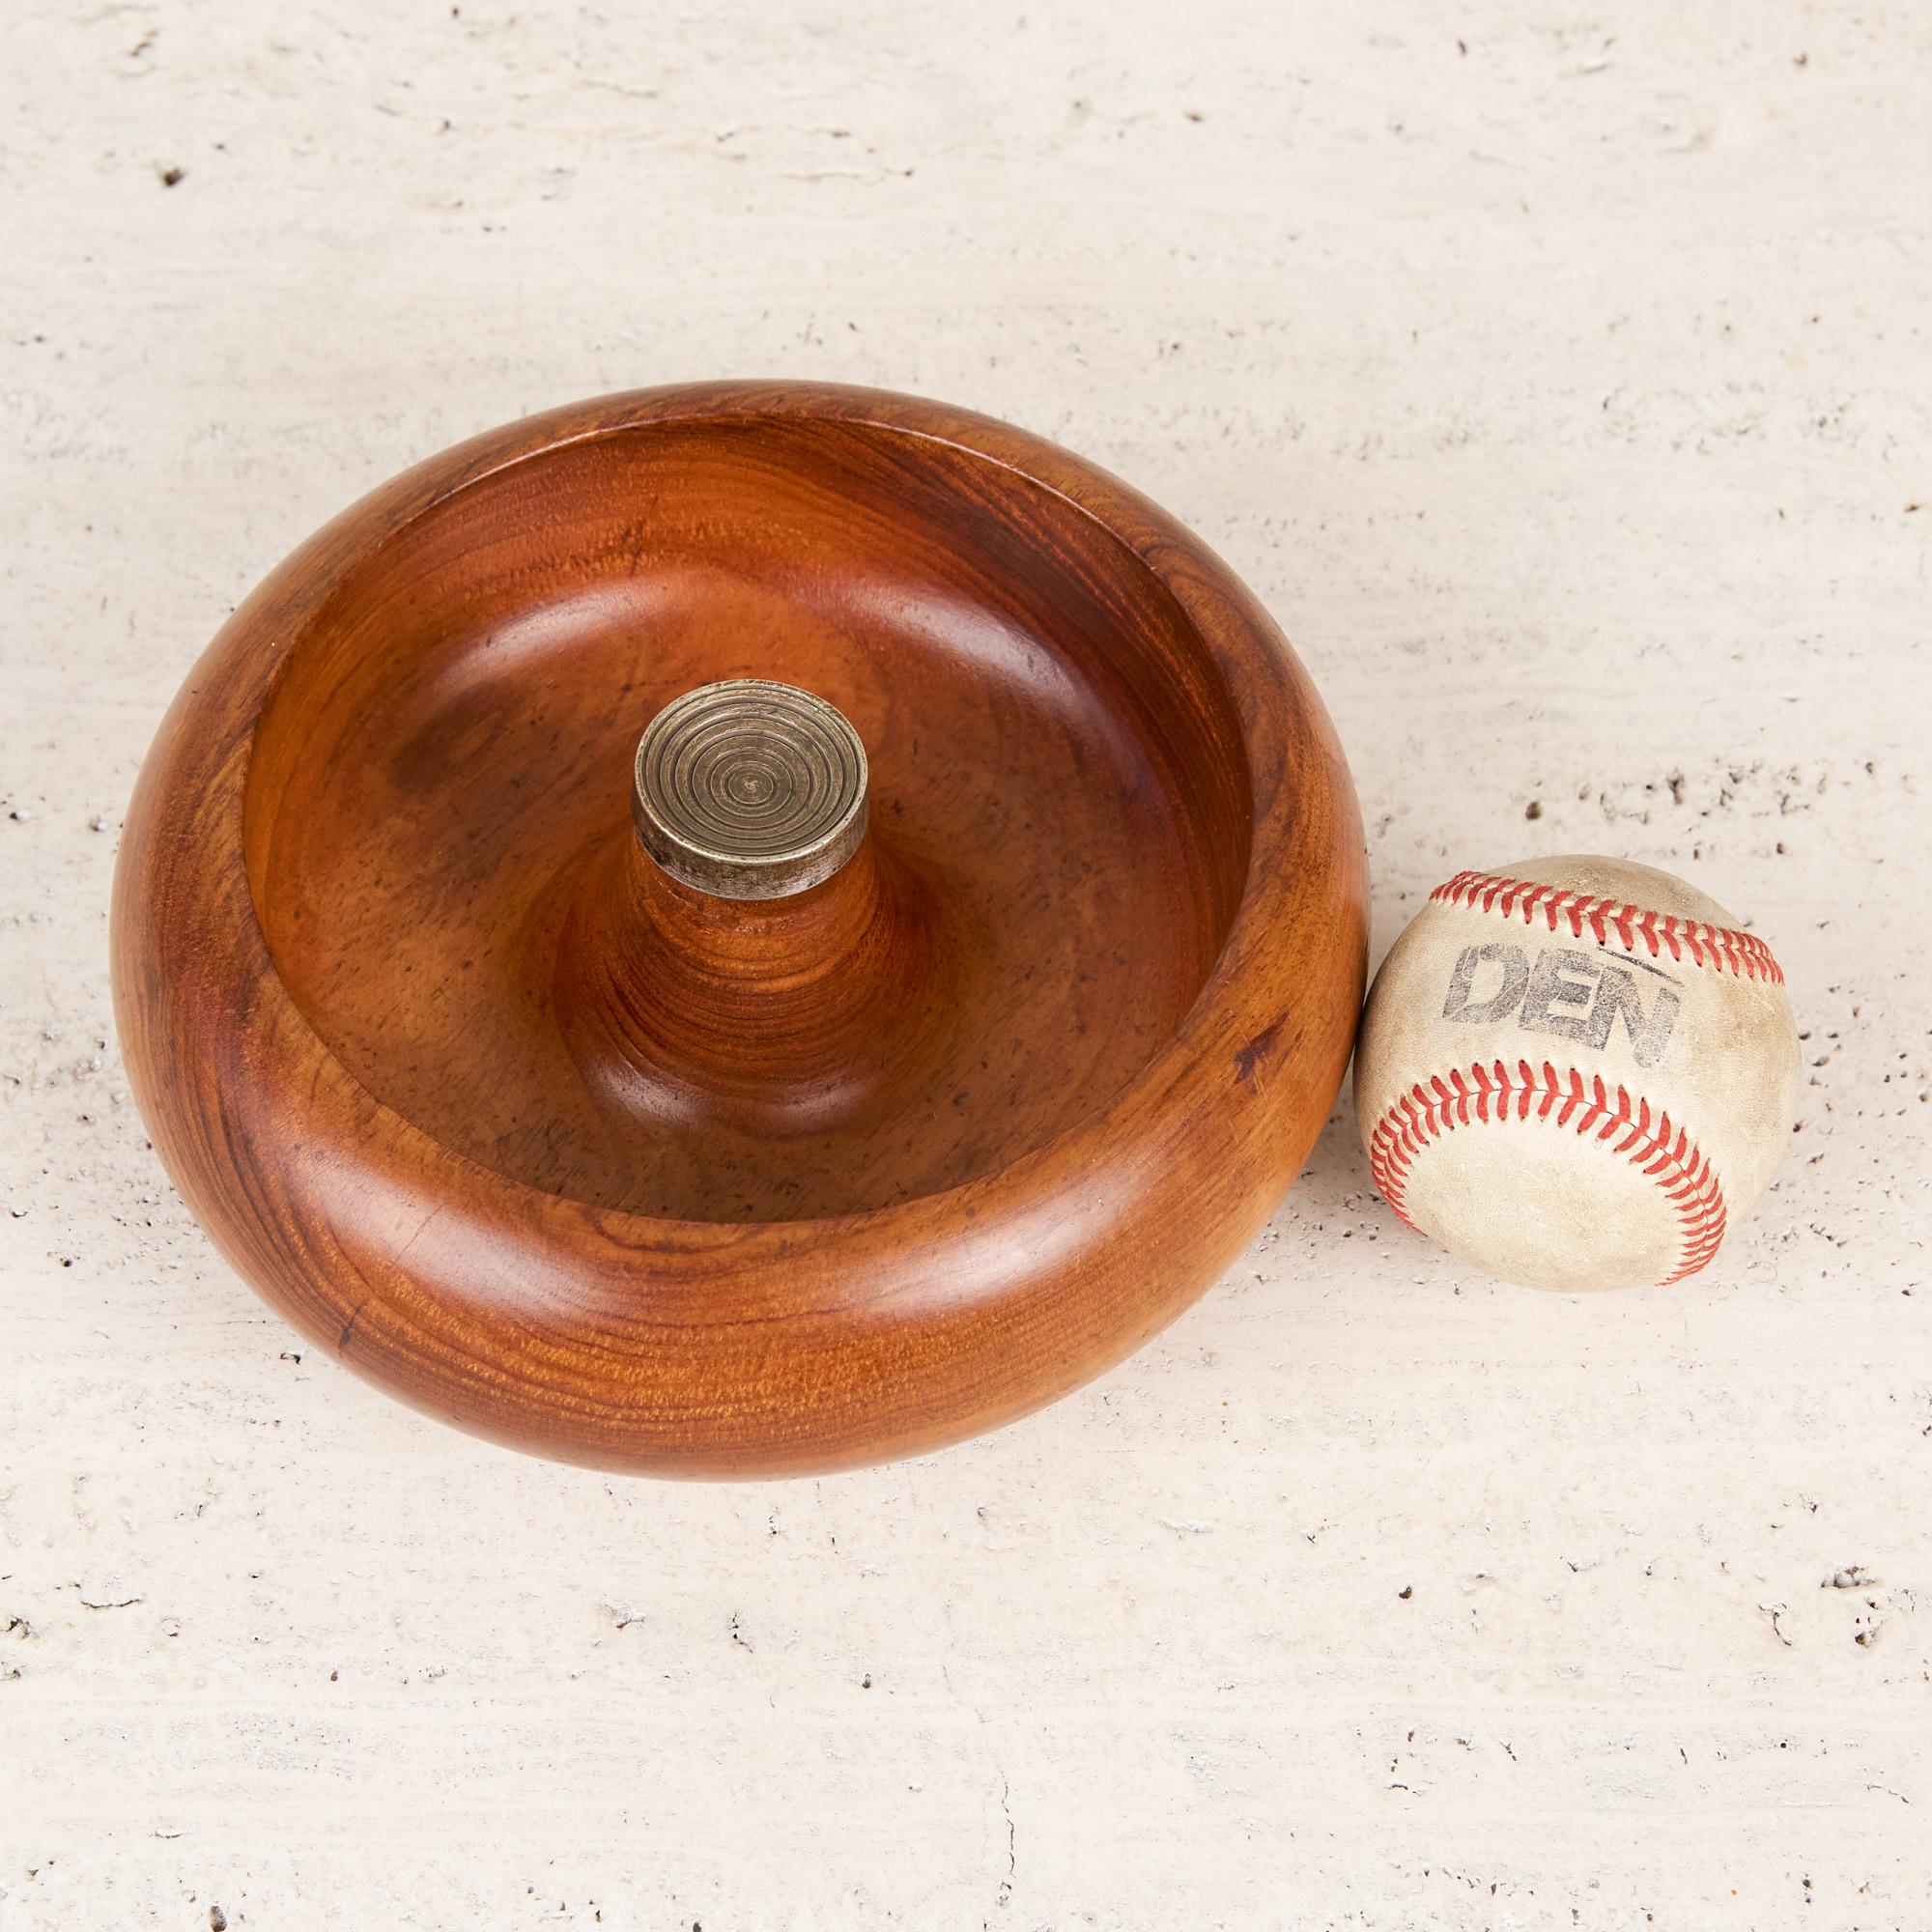 Mid-Century Modern Turned Walnut and Brass Nut Bowl by Pelican of Australia